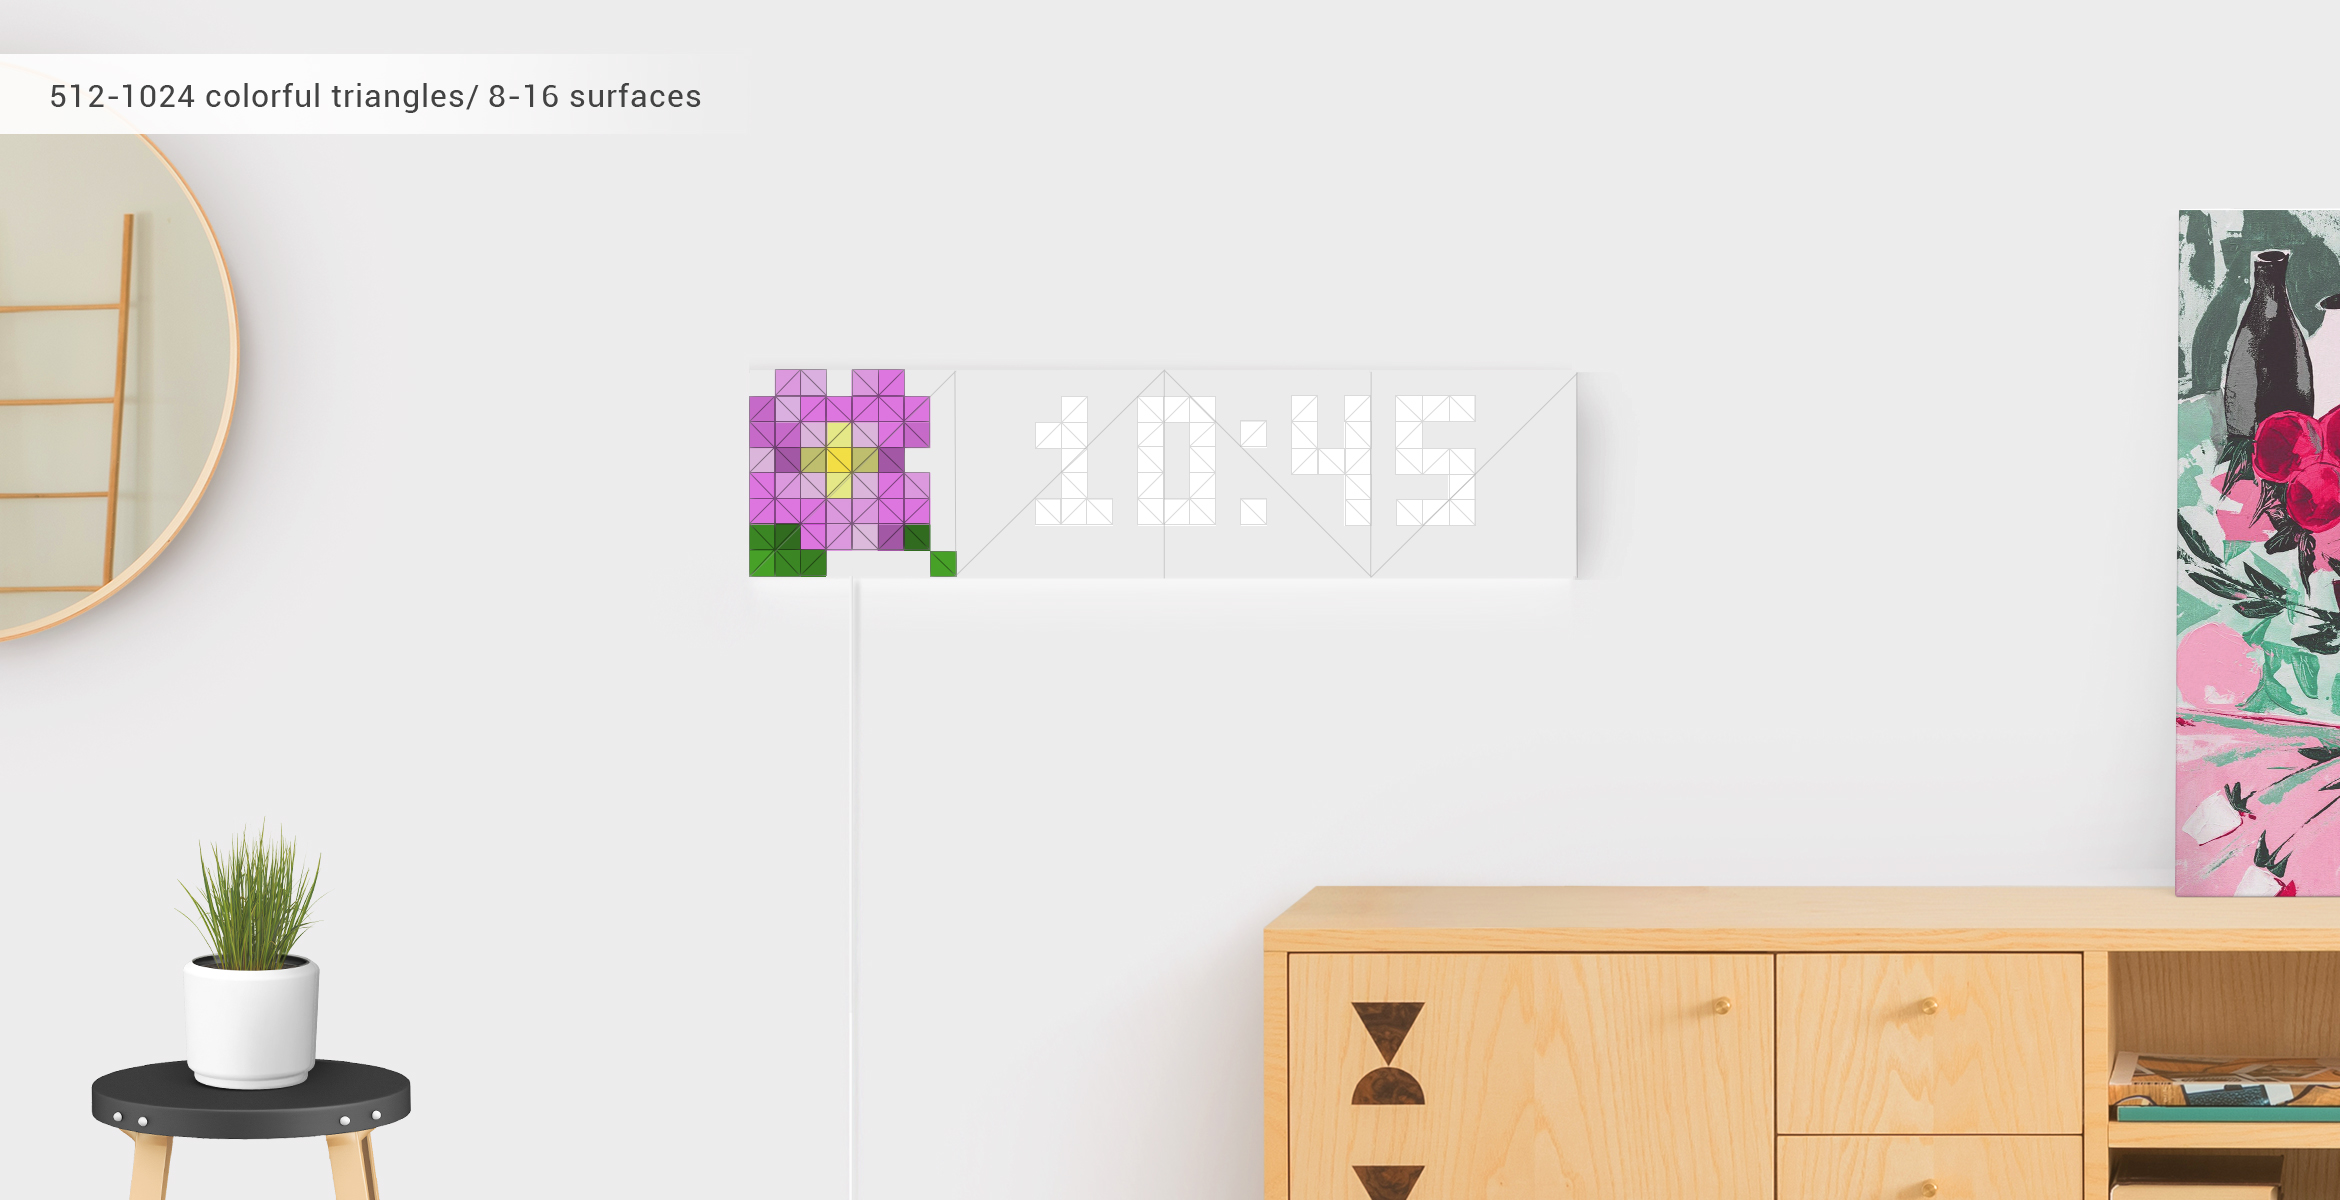 Infoscreen shape, assembled from 16 LaMetric SKY smart light surfaces, displays time and flower Sky face